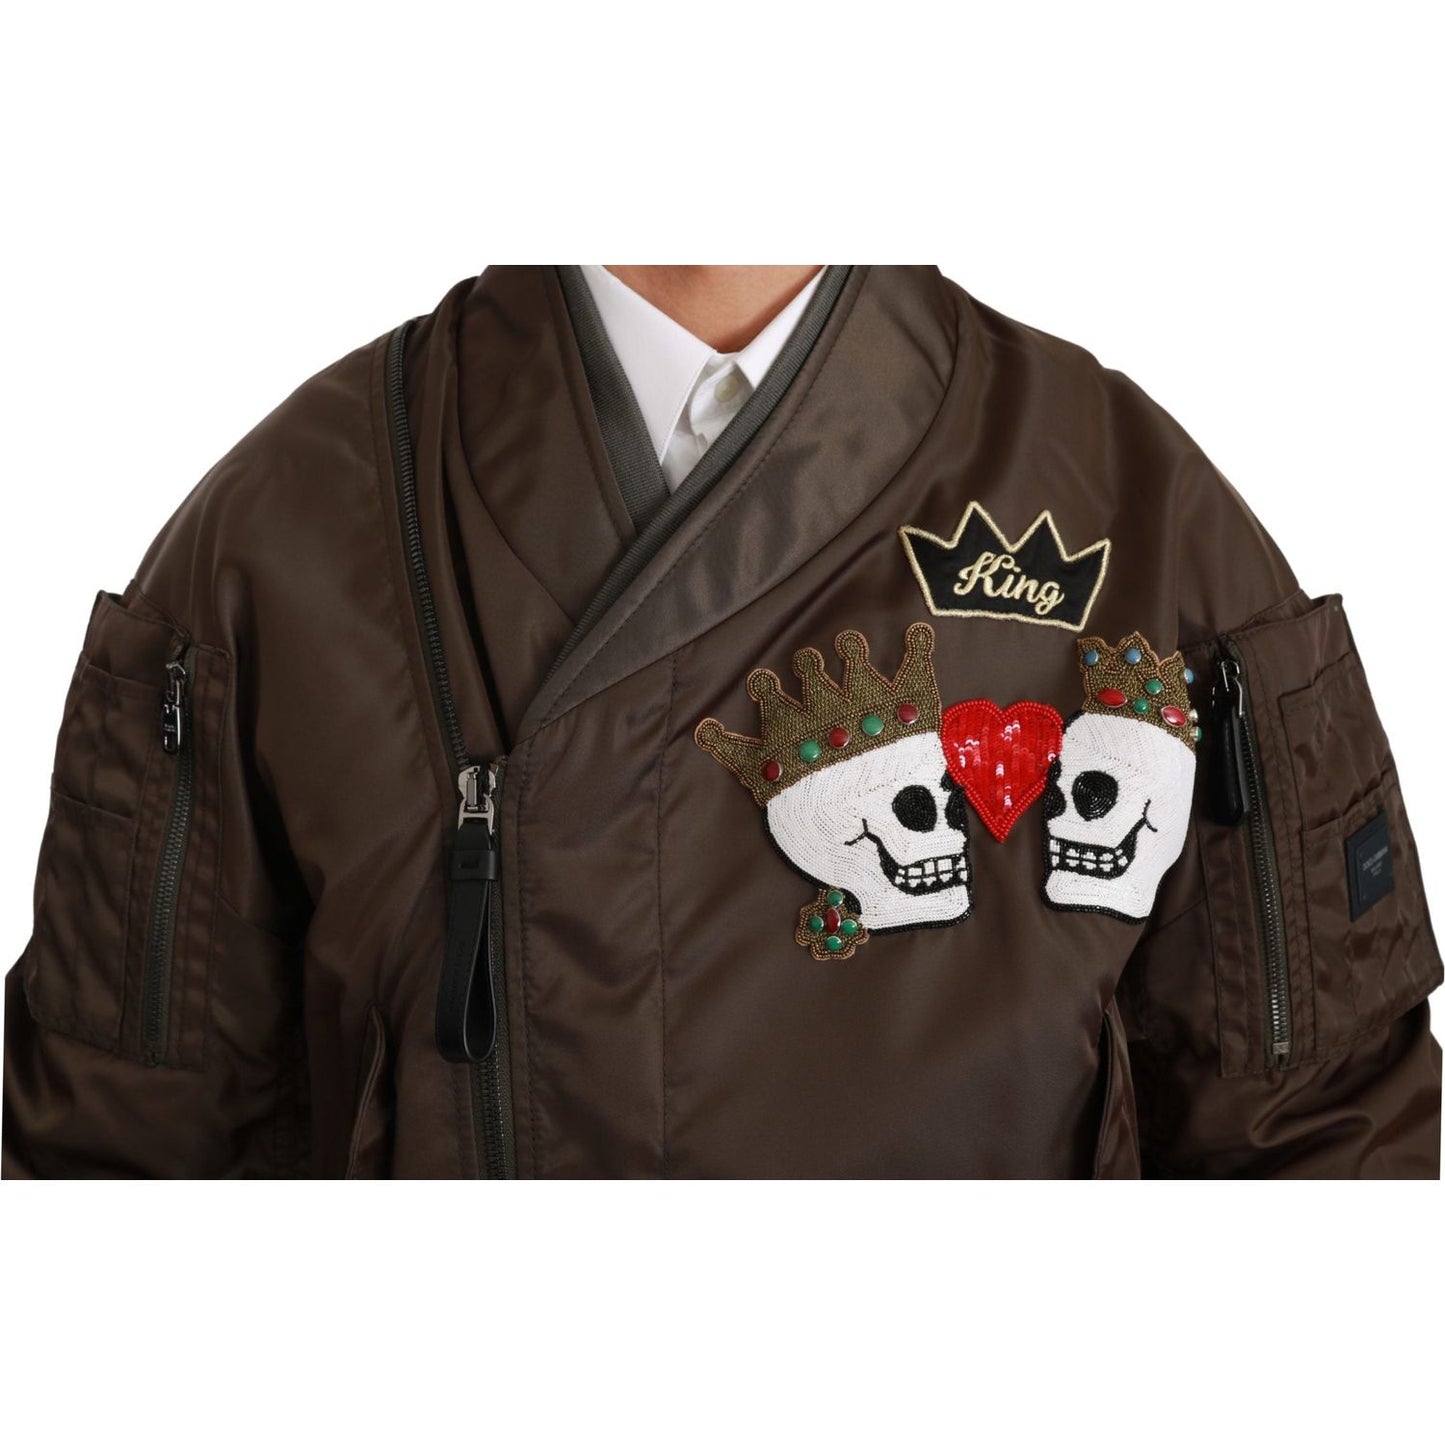 Dolce & Gabbana Sequined Double-Breasted Bomber Jacket brown-beaded-crown-skull-logo-jacket Coats & Jackets